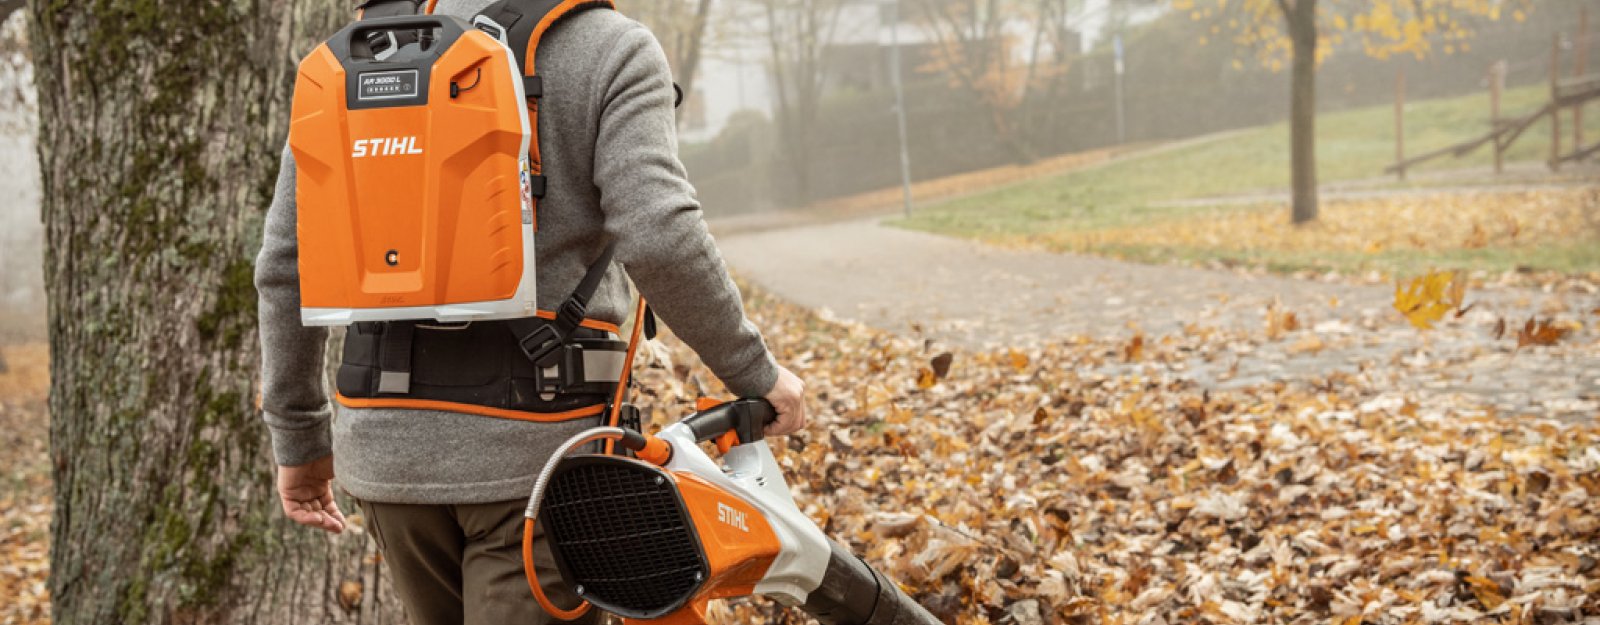 Stihl leaf blowers - Balmers Buying Guide